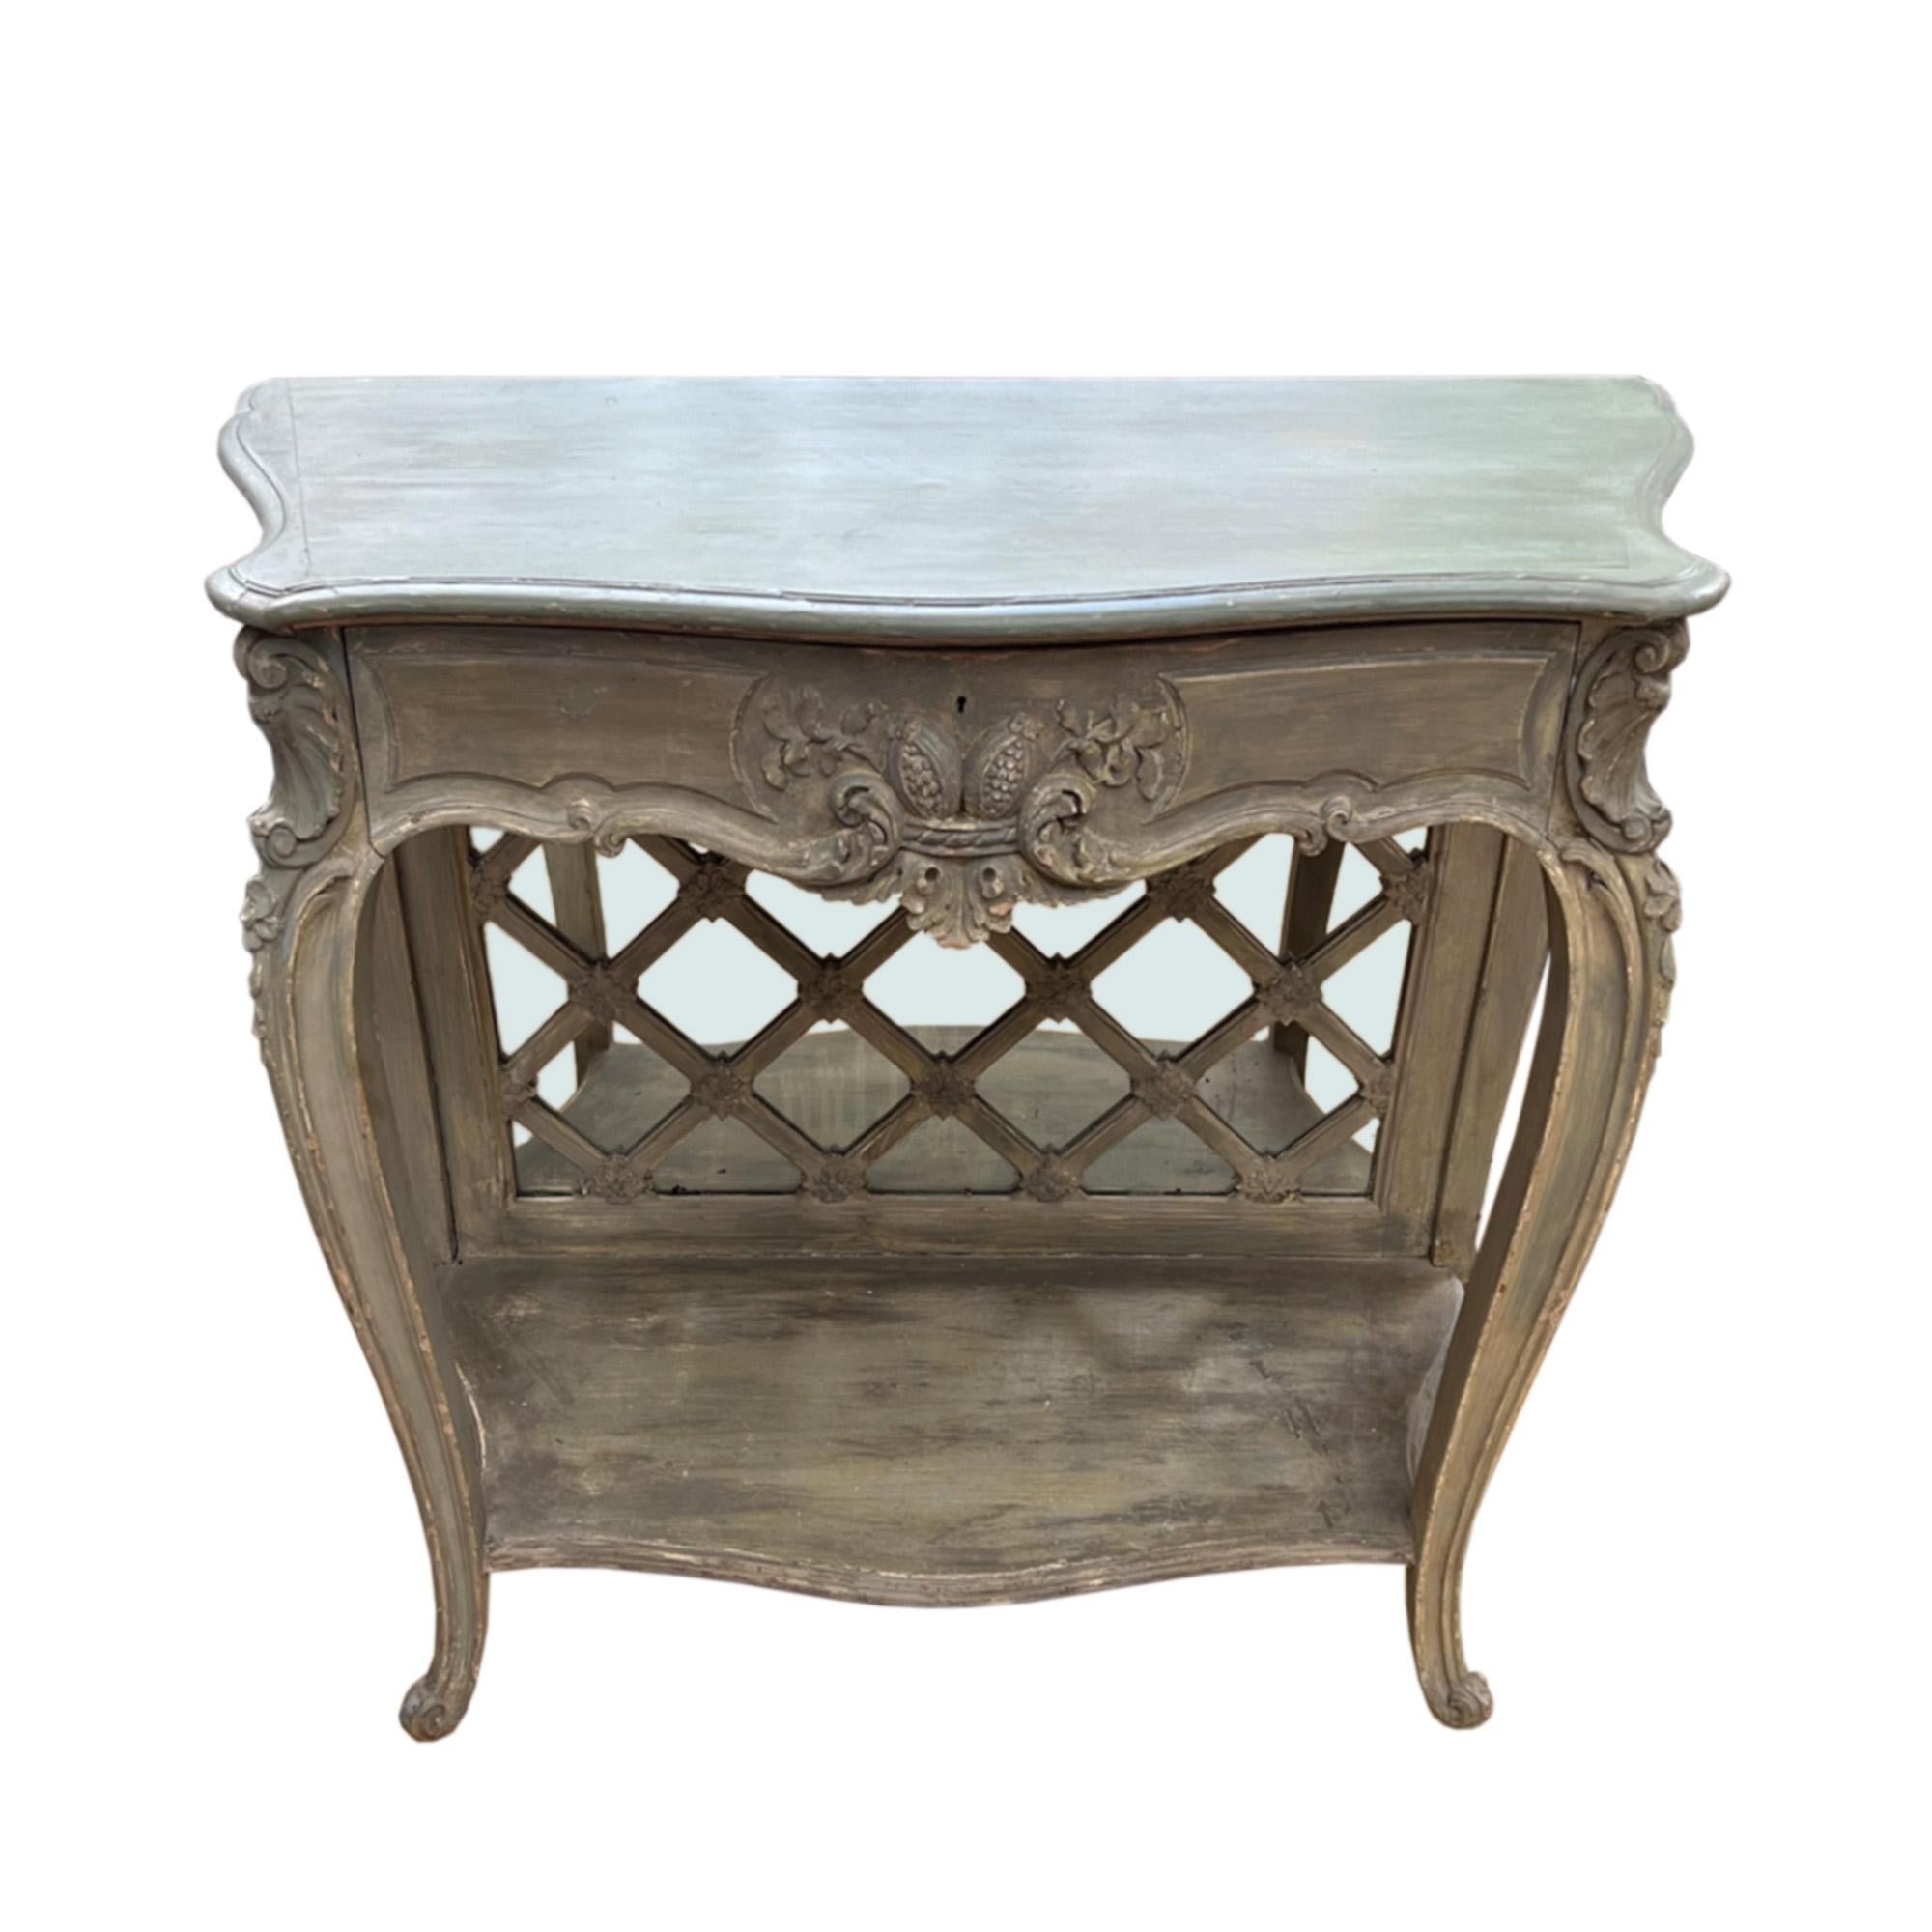 A beautiful pair of hand carved Italian console tables with original paint and mirror plate. 

Please take a look at all our pictures to see the decorative details

Fantastic Italian craftsmanship.